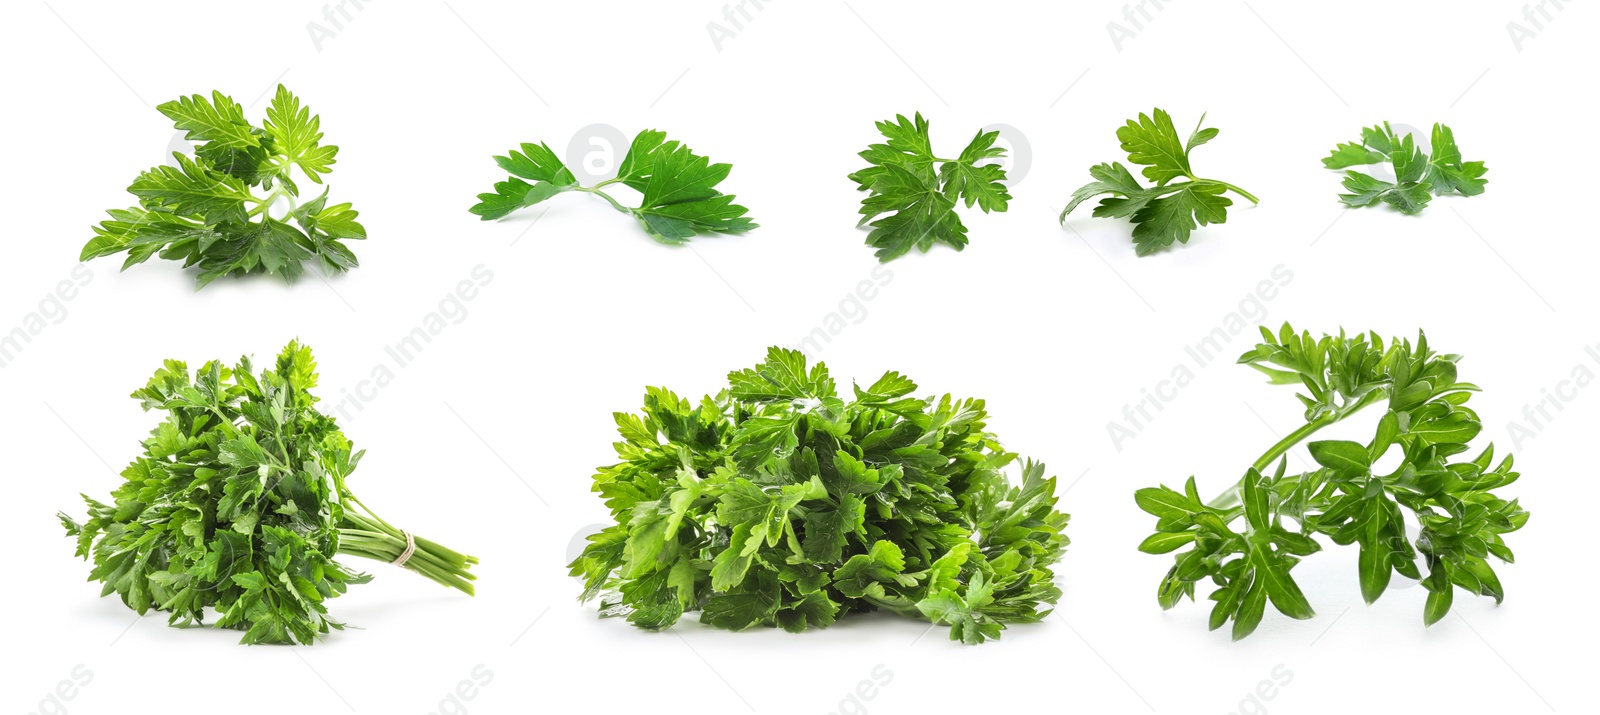 Image of Set with green parsley on white background. Banner design